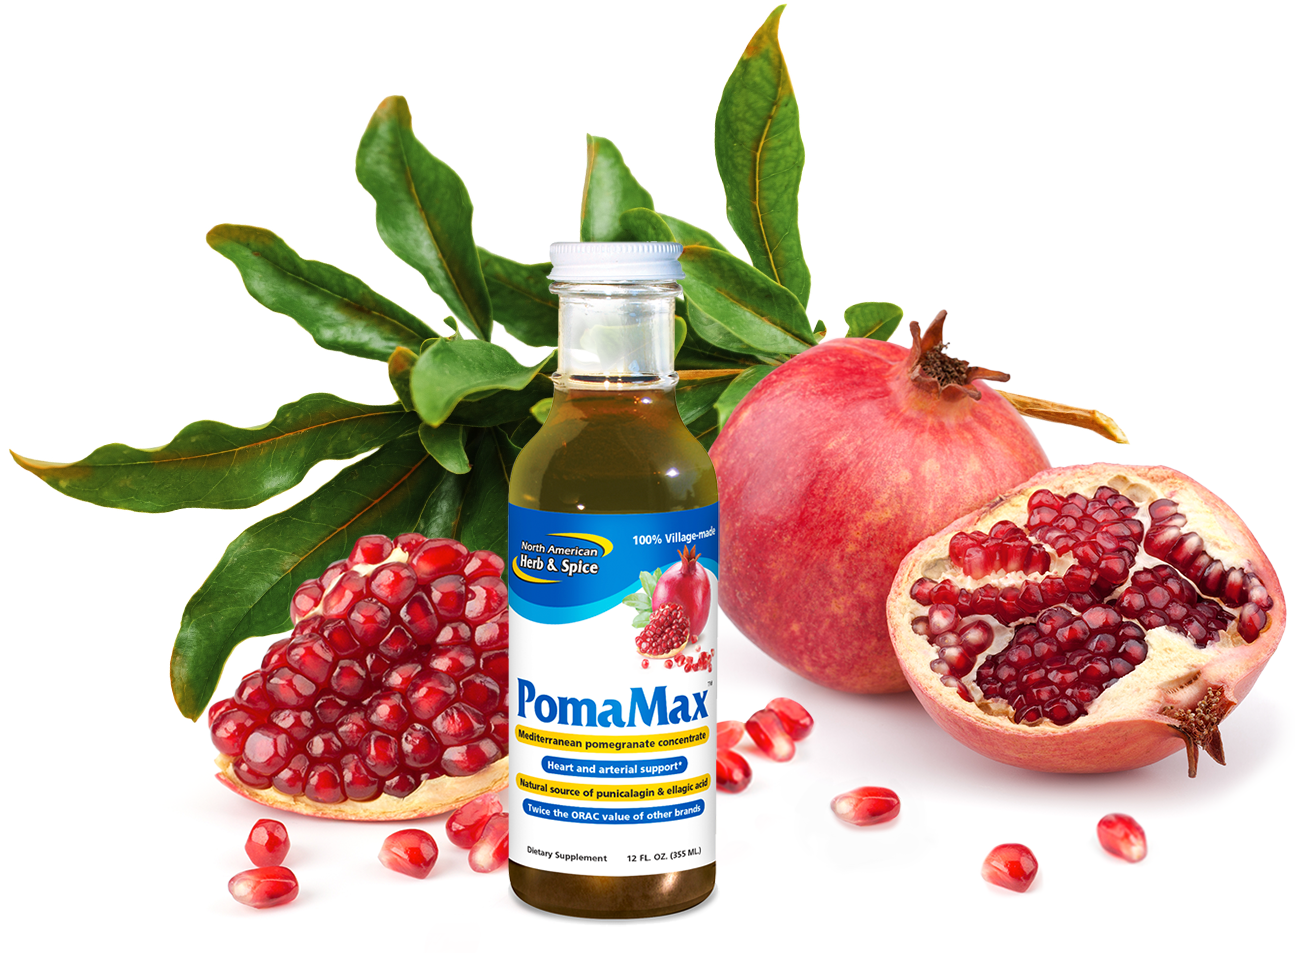 Pomegranate ingredient with PomaMax product